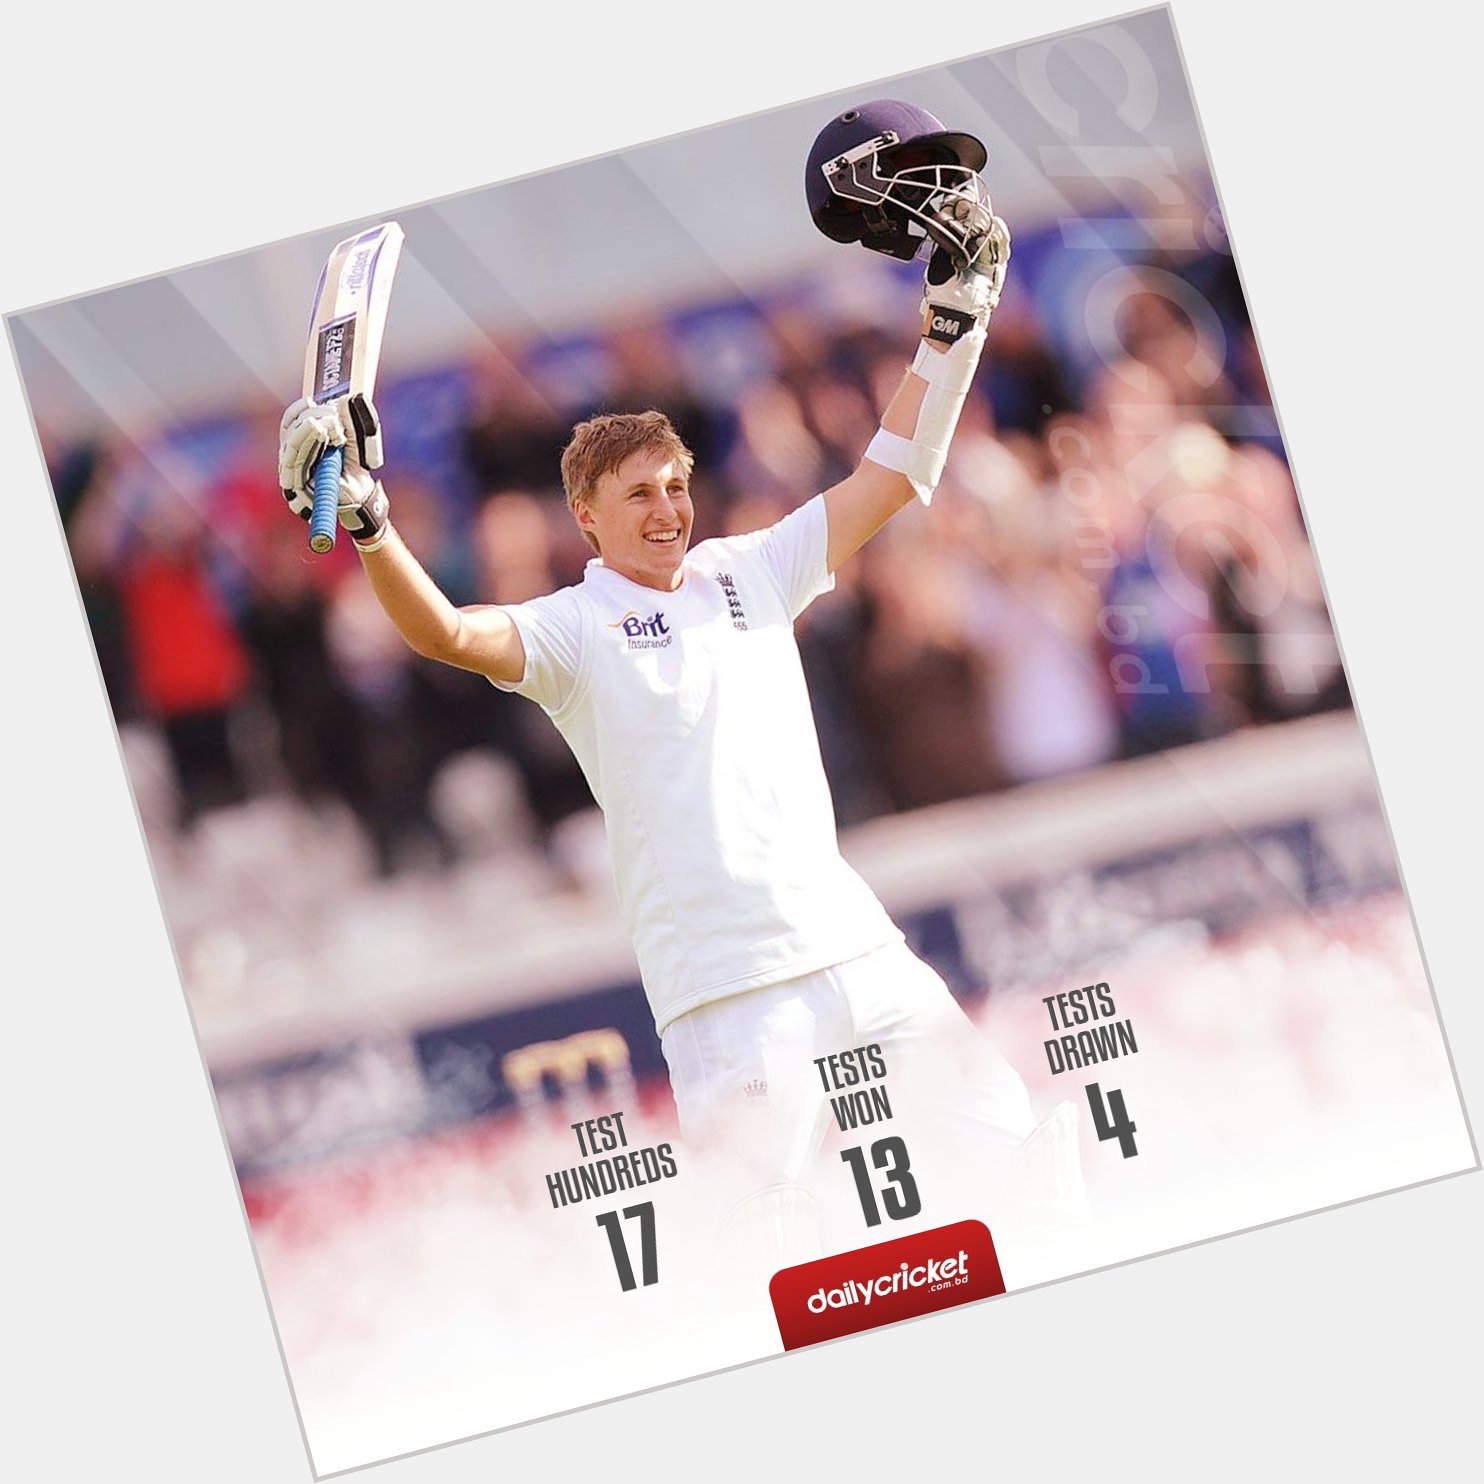   scores a test hundred = England don\t lost! Happy Birthday Joe Root.  